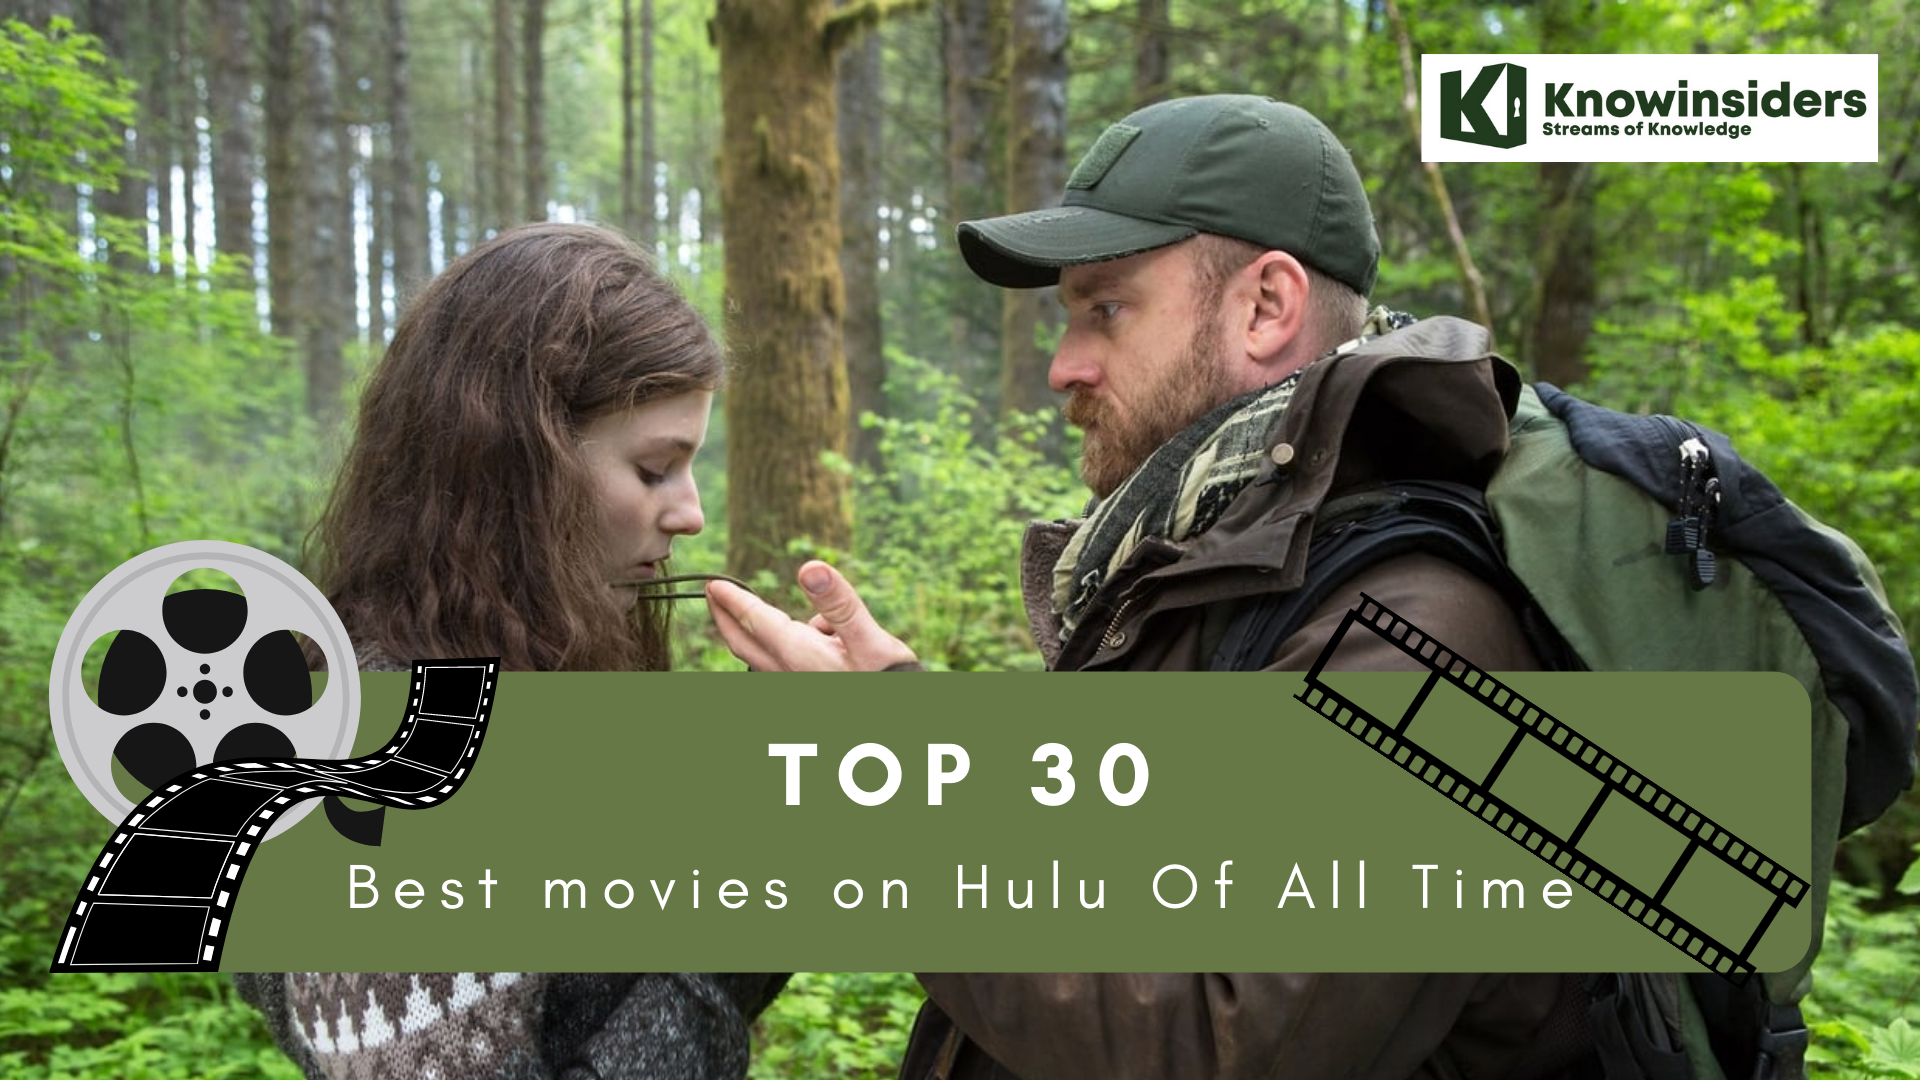 Top 30 best movies on Hulu of all time 